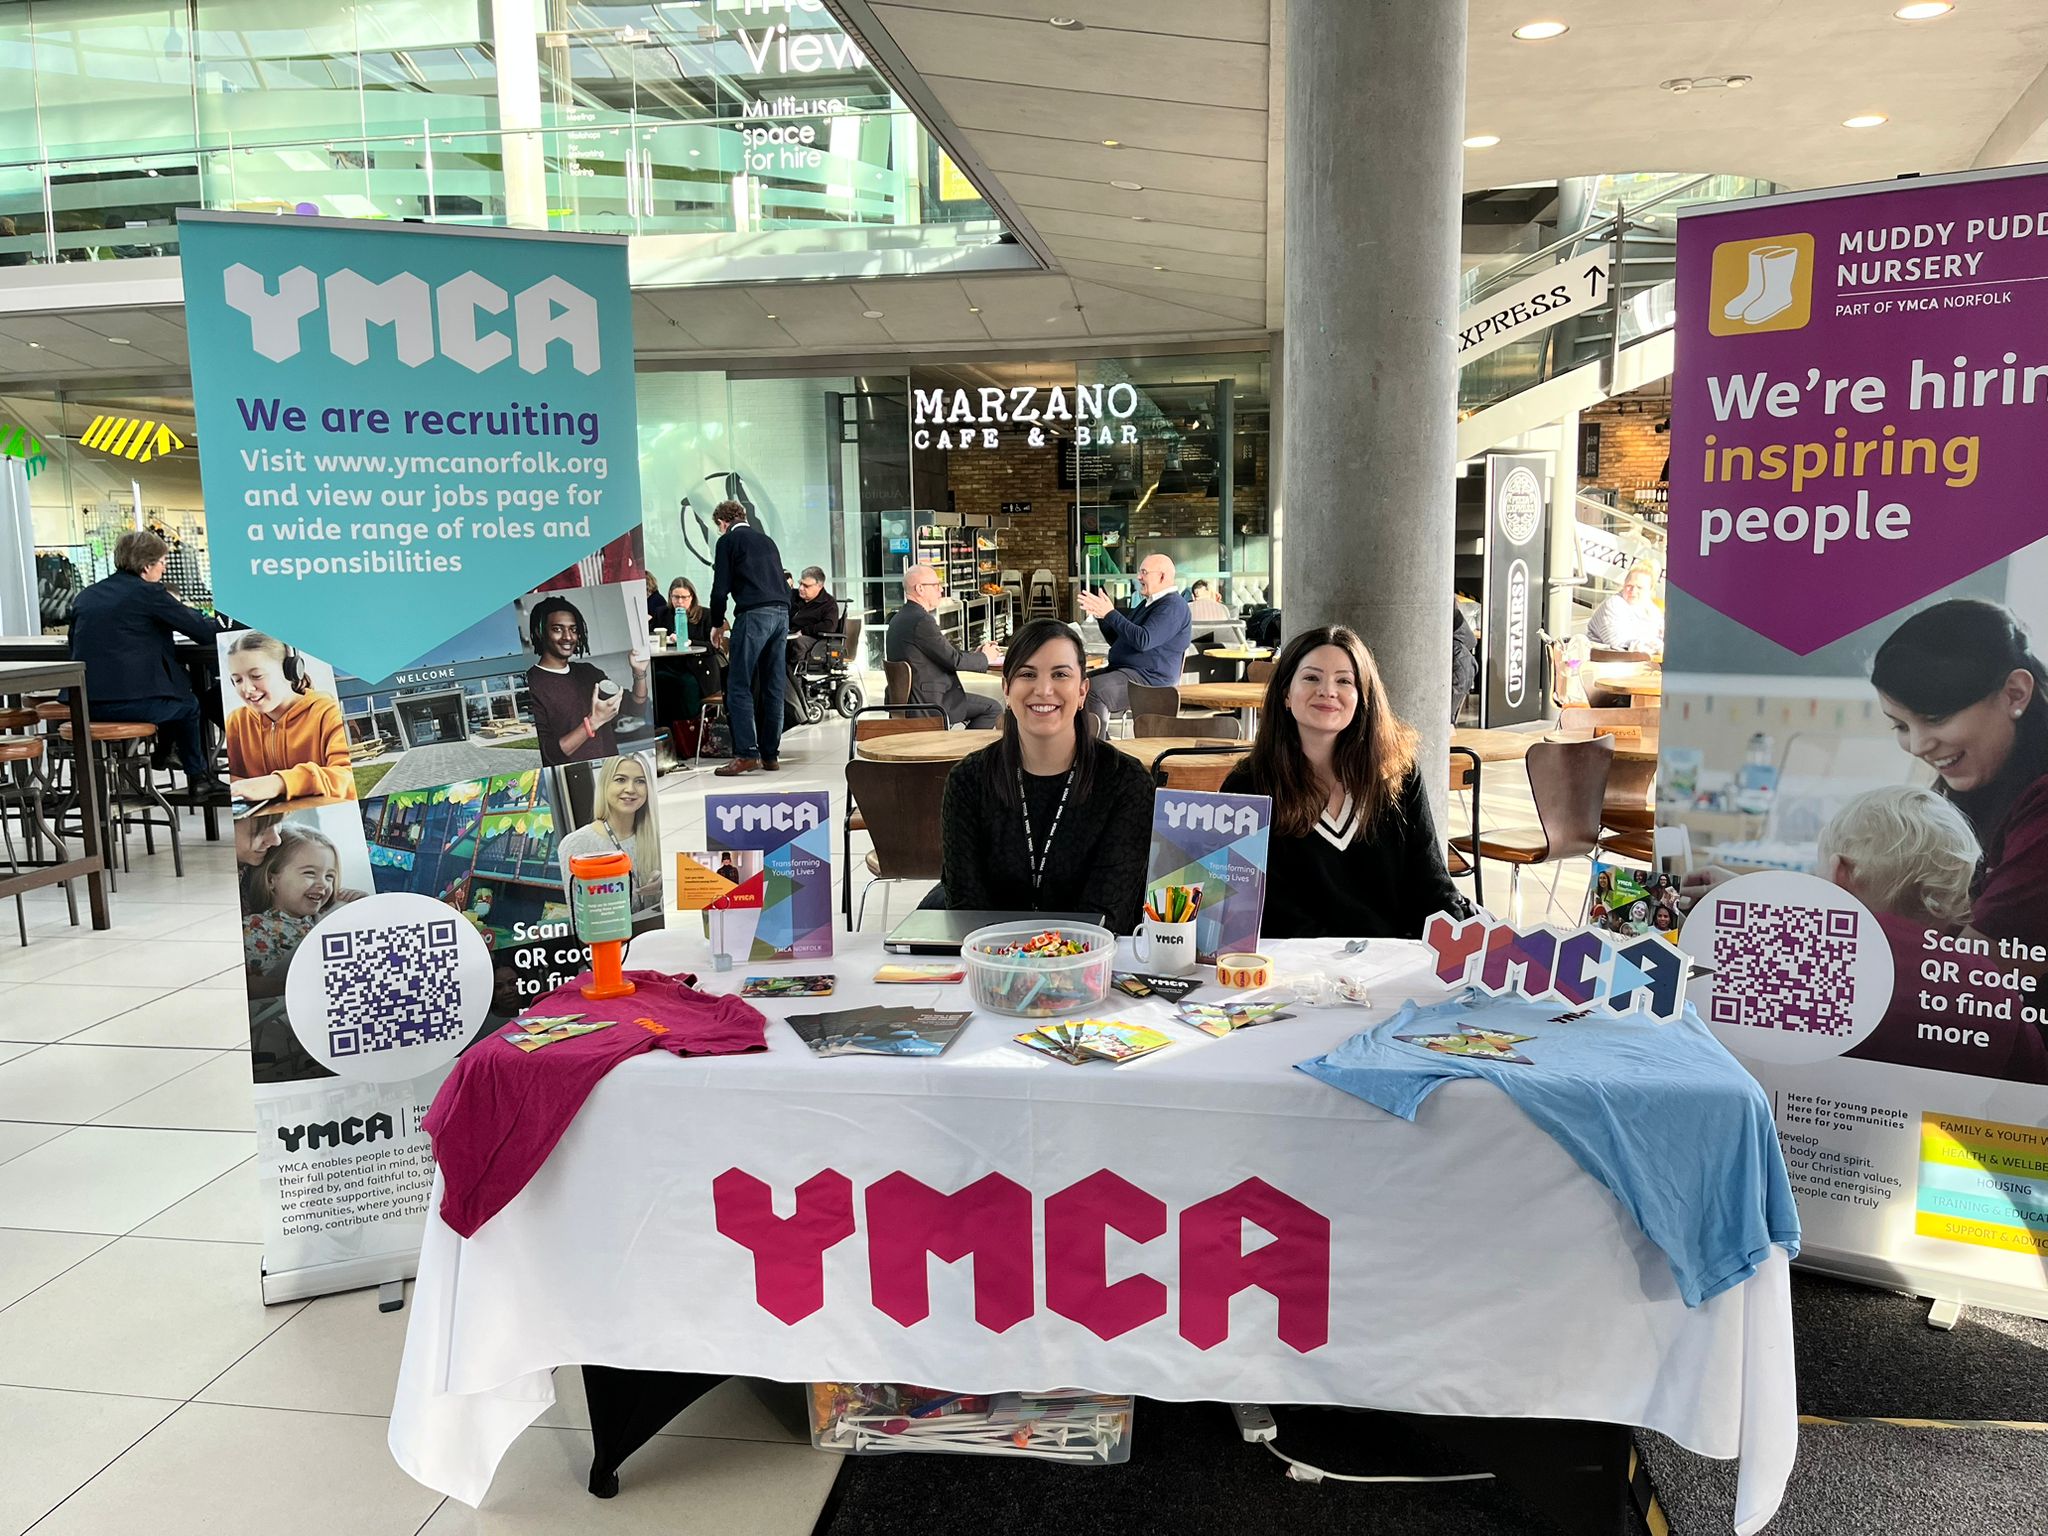 YMCA at our event in Norwich